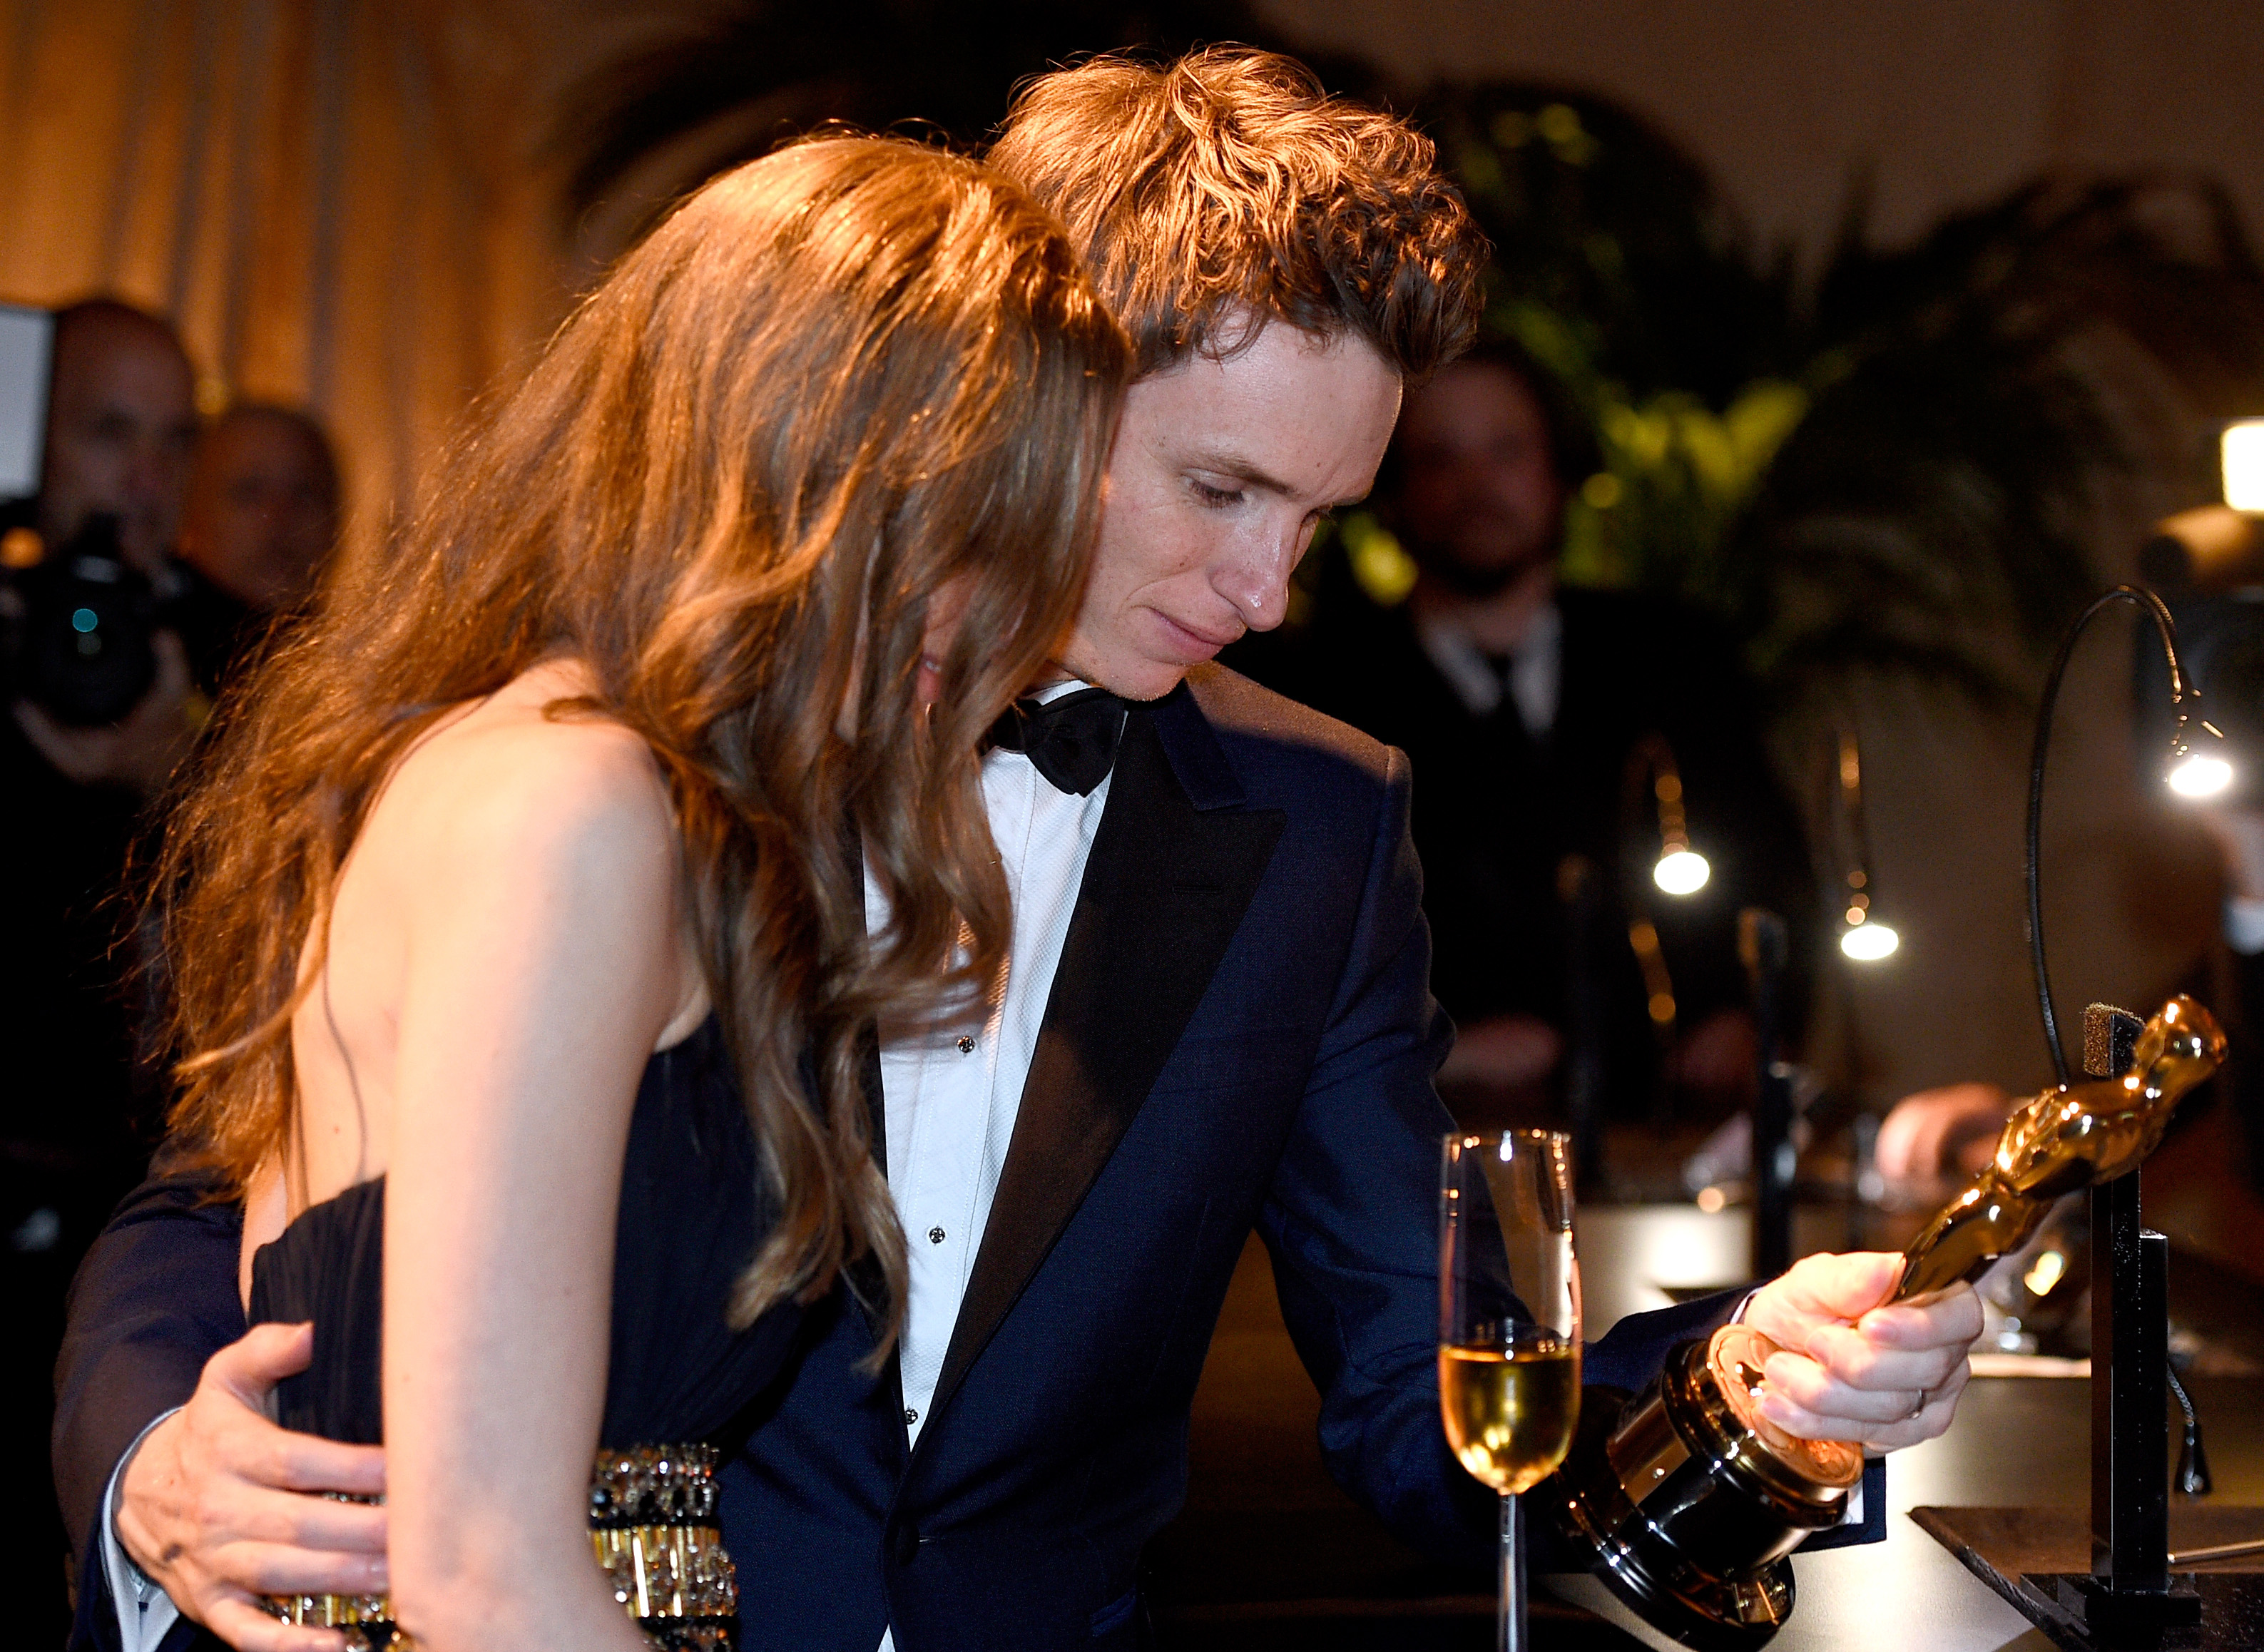 HOLLYWOOD, CA - FEBRUARY 22: Best Actor in a Leading Role winner Eddie Redmayne, and Hannah Bagshawe attend the 87th Annual Academy Awards Governors Ball at Hollywood & Highland Center on February 22, 2015 in Hollywood, California. (Photo by Kevork Djansezian/Getty Images)